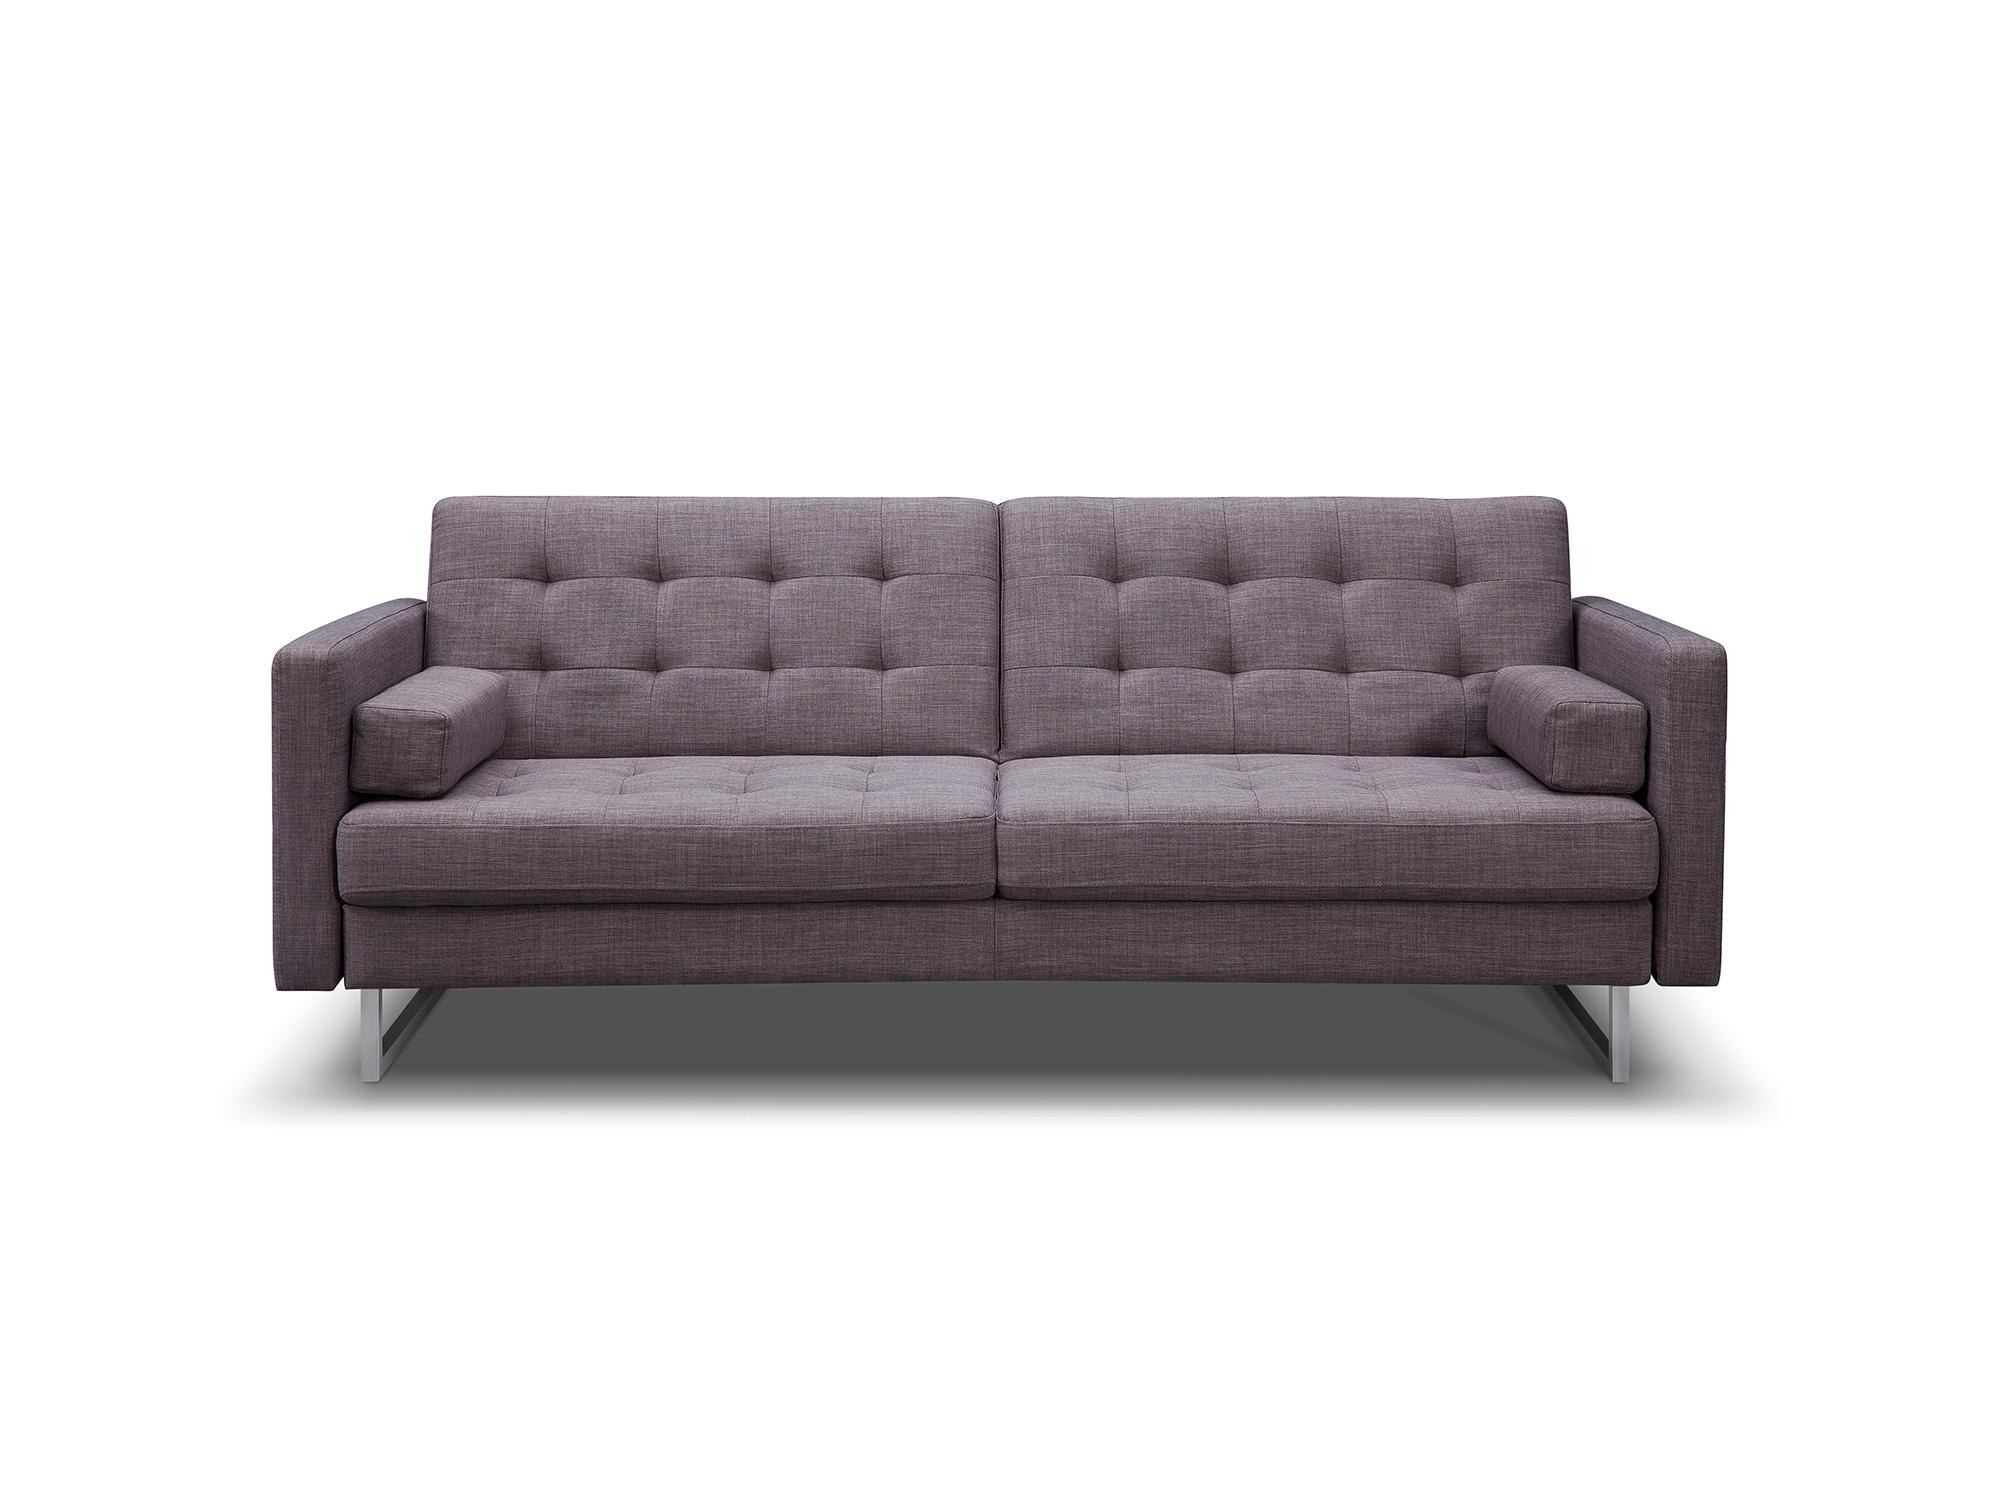 Modern Sofa bed SO1195F-GRY Giovanni SO1195F-GRY in Gray Fabric